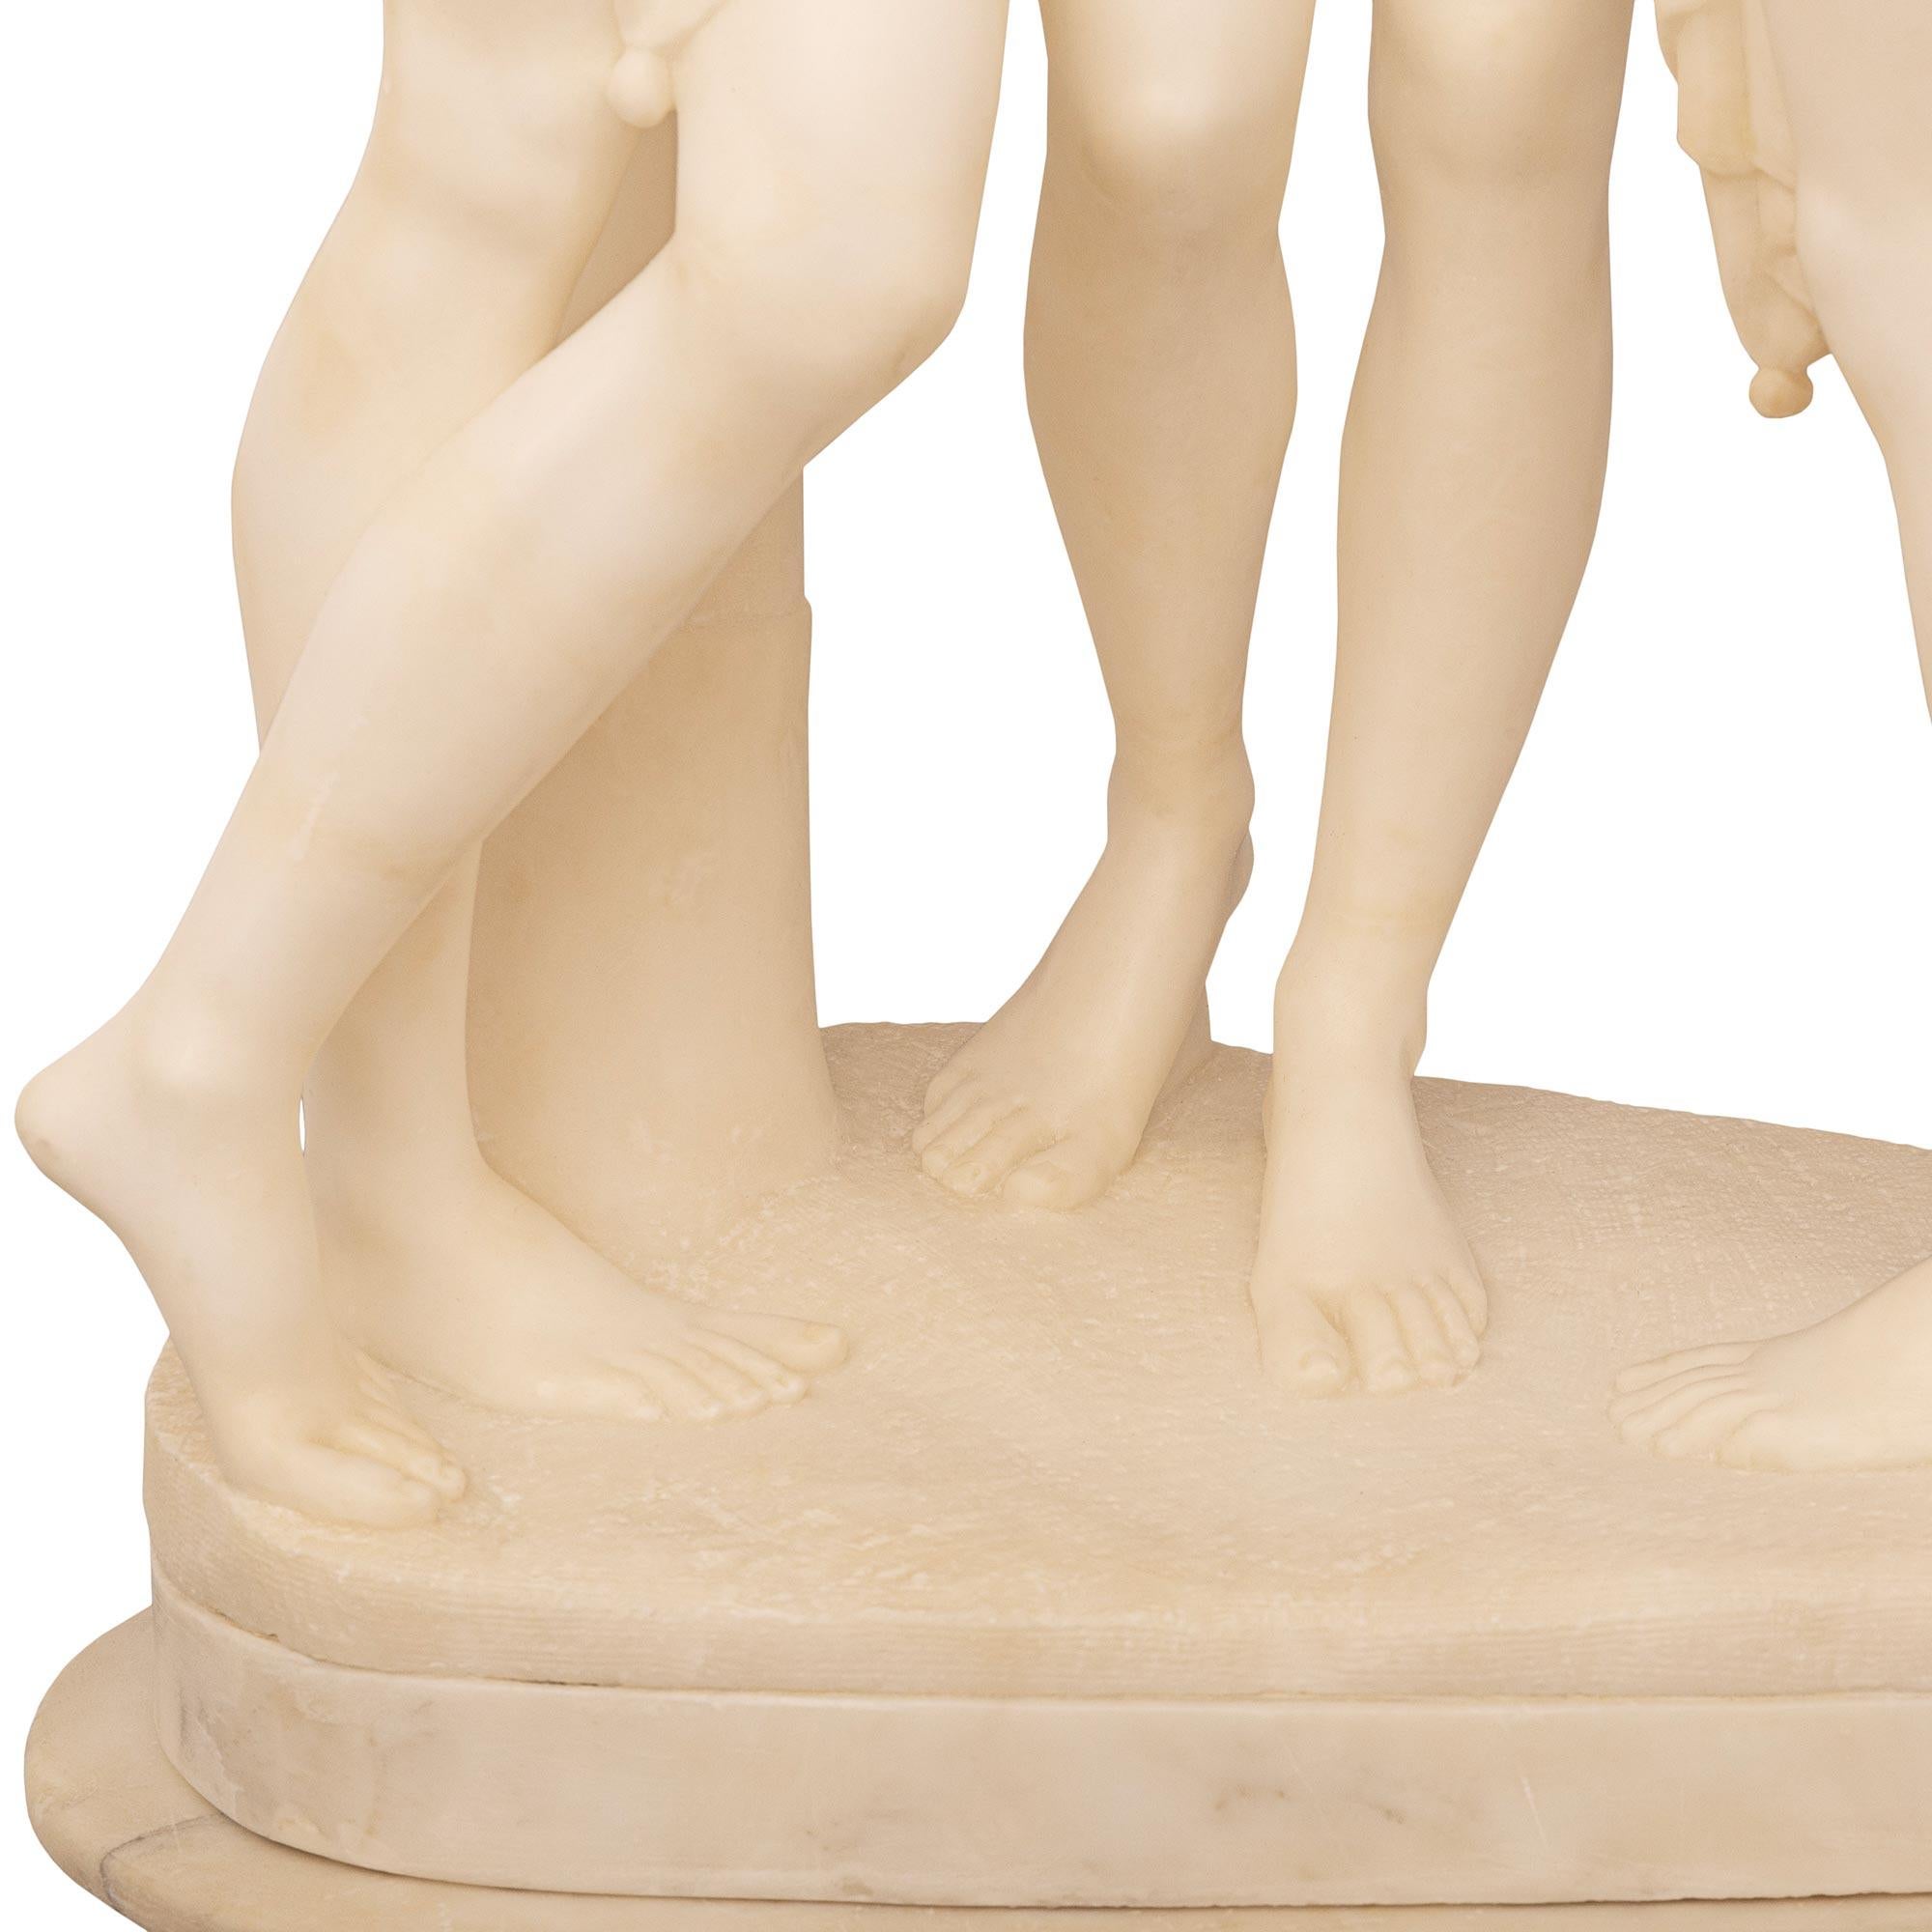 Italian 19th century Neo-Classical st. Alabaster statue of The Three Graces For Sale 5